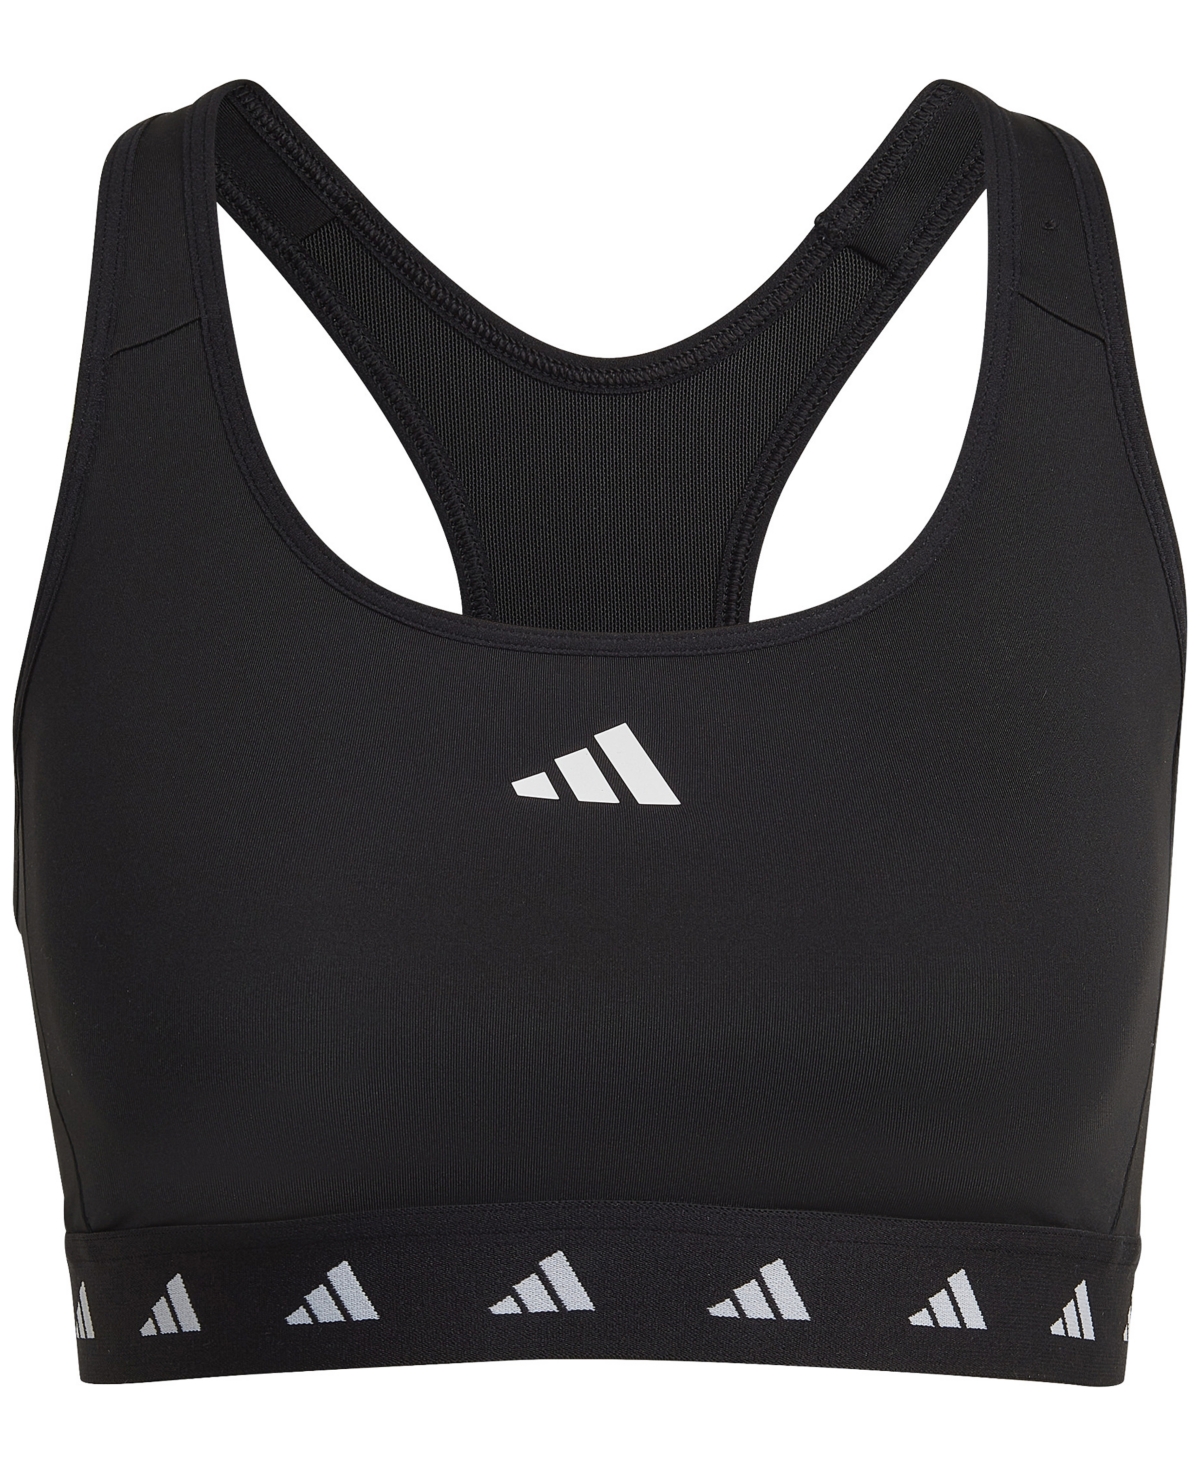 Adidas Originals Adidas Adidas Powerreact Train Medium Support Techfit Bra Woman Top Navy Blue Size Xs A-c Recycled P In Black/white